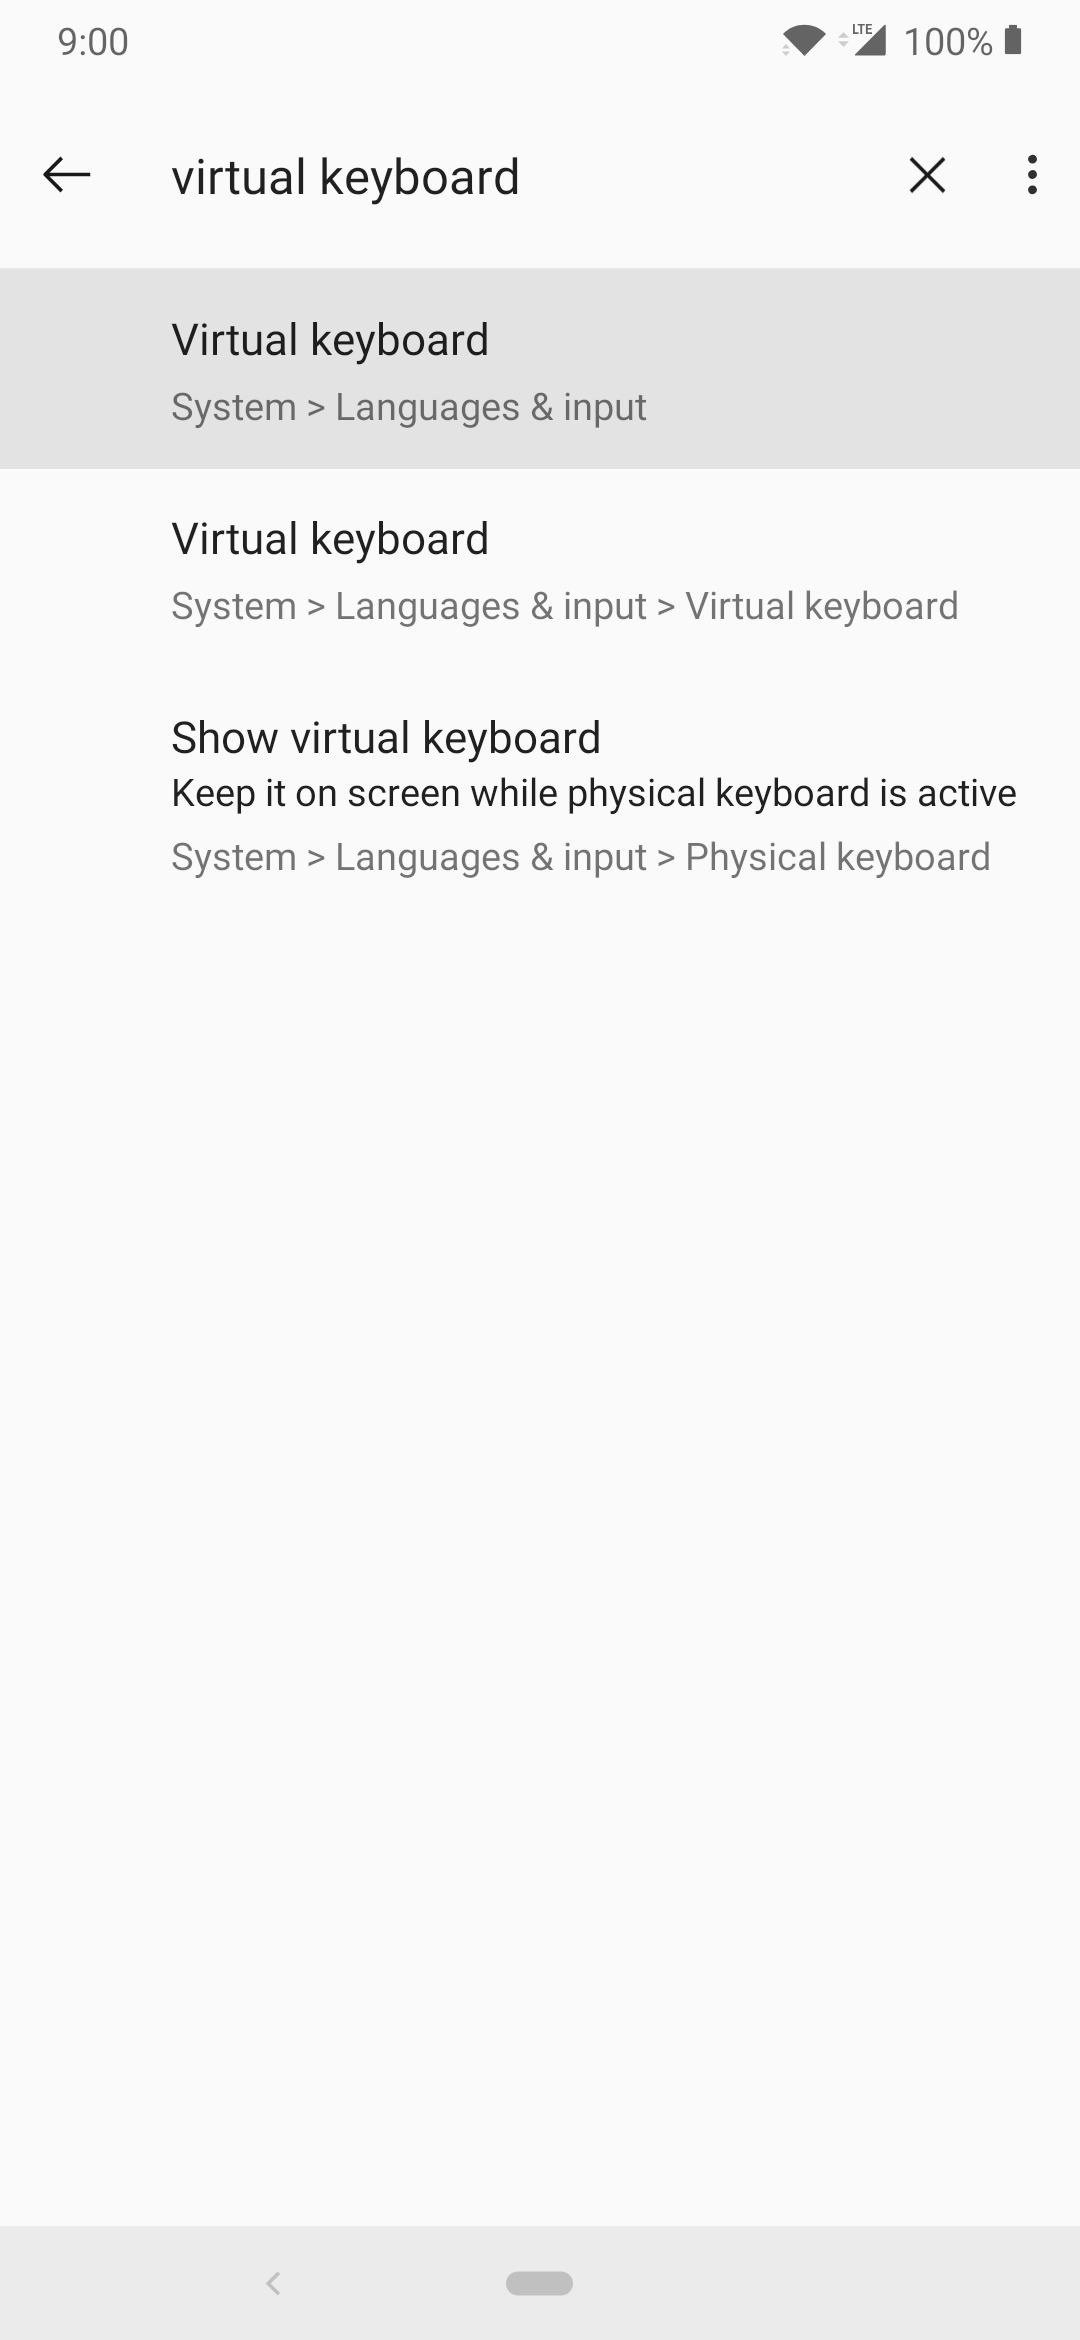 Get Over 100 New & Unique Themes for Gboard on Android